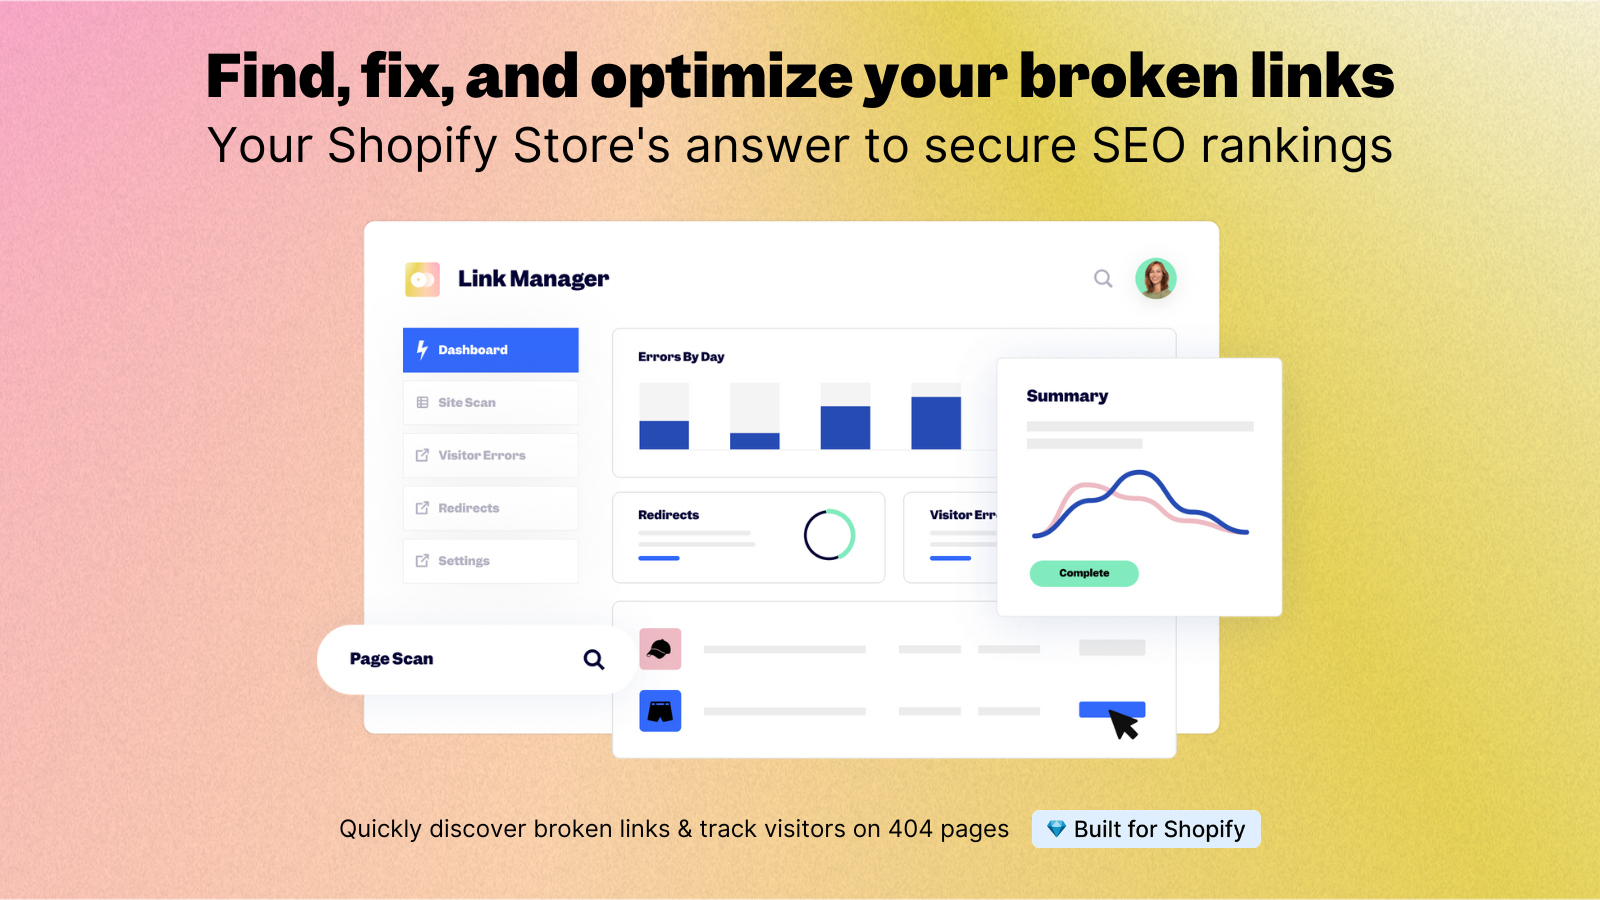 Easily discover broken links, track visitors on 404 pages